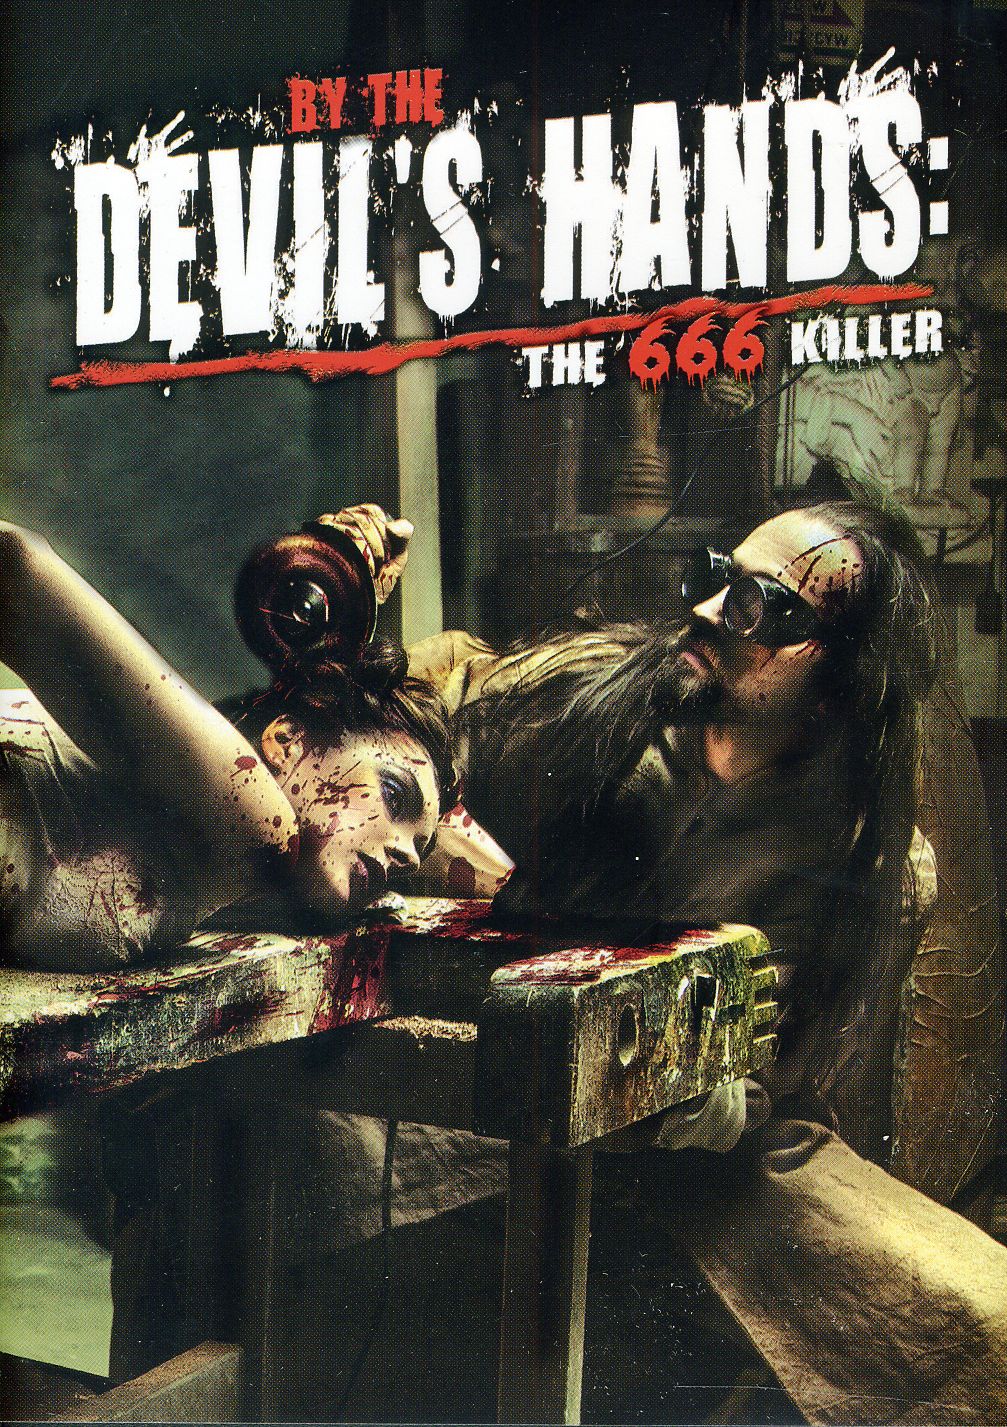 BY THE DEVIL'S HANDS: THE 666 KILLER